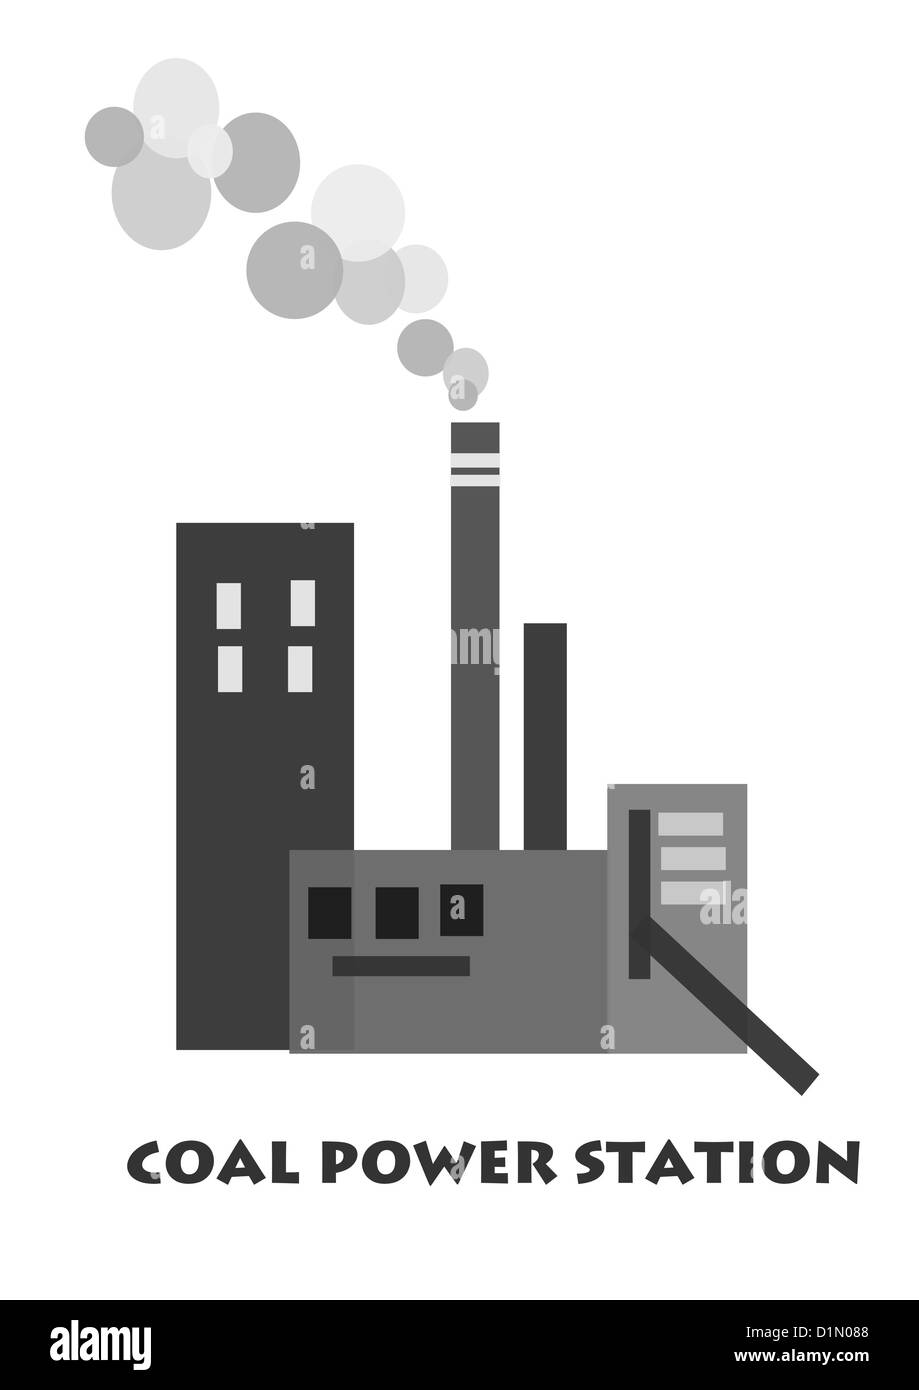 Polution from coal power station - vector Stock Photo